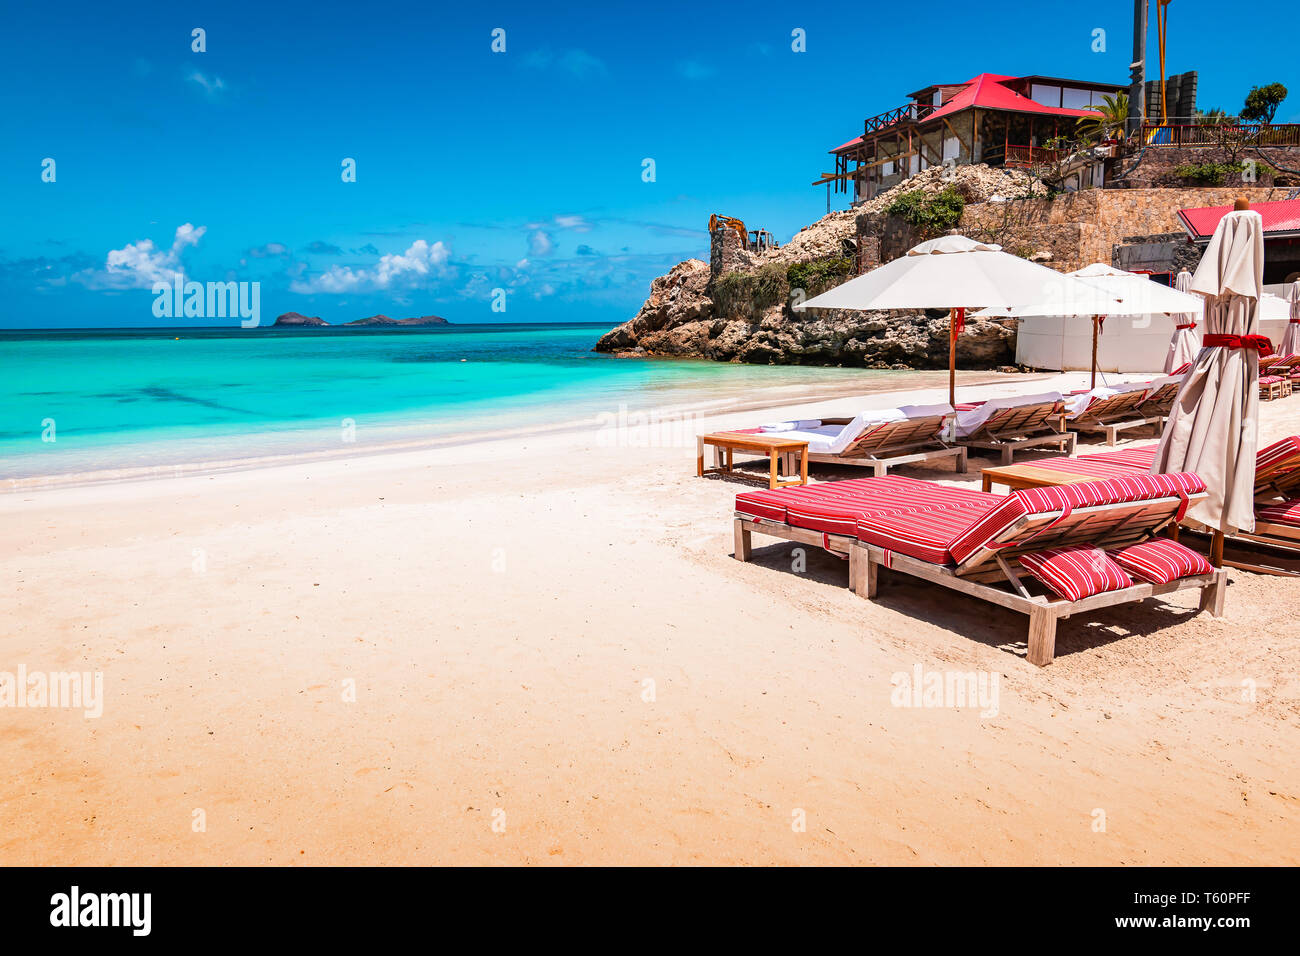 Luxury beach chairs and umbrella on exotic beach in St Barths, Caribbean Island. Stock Photo